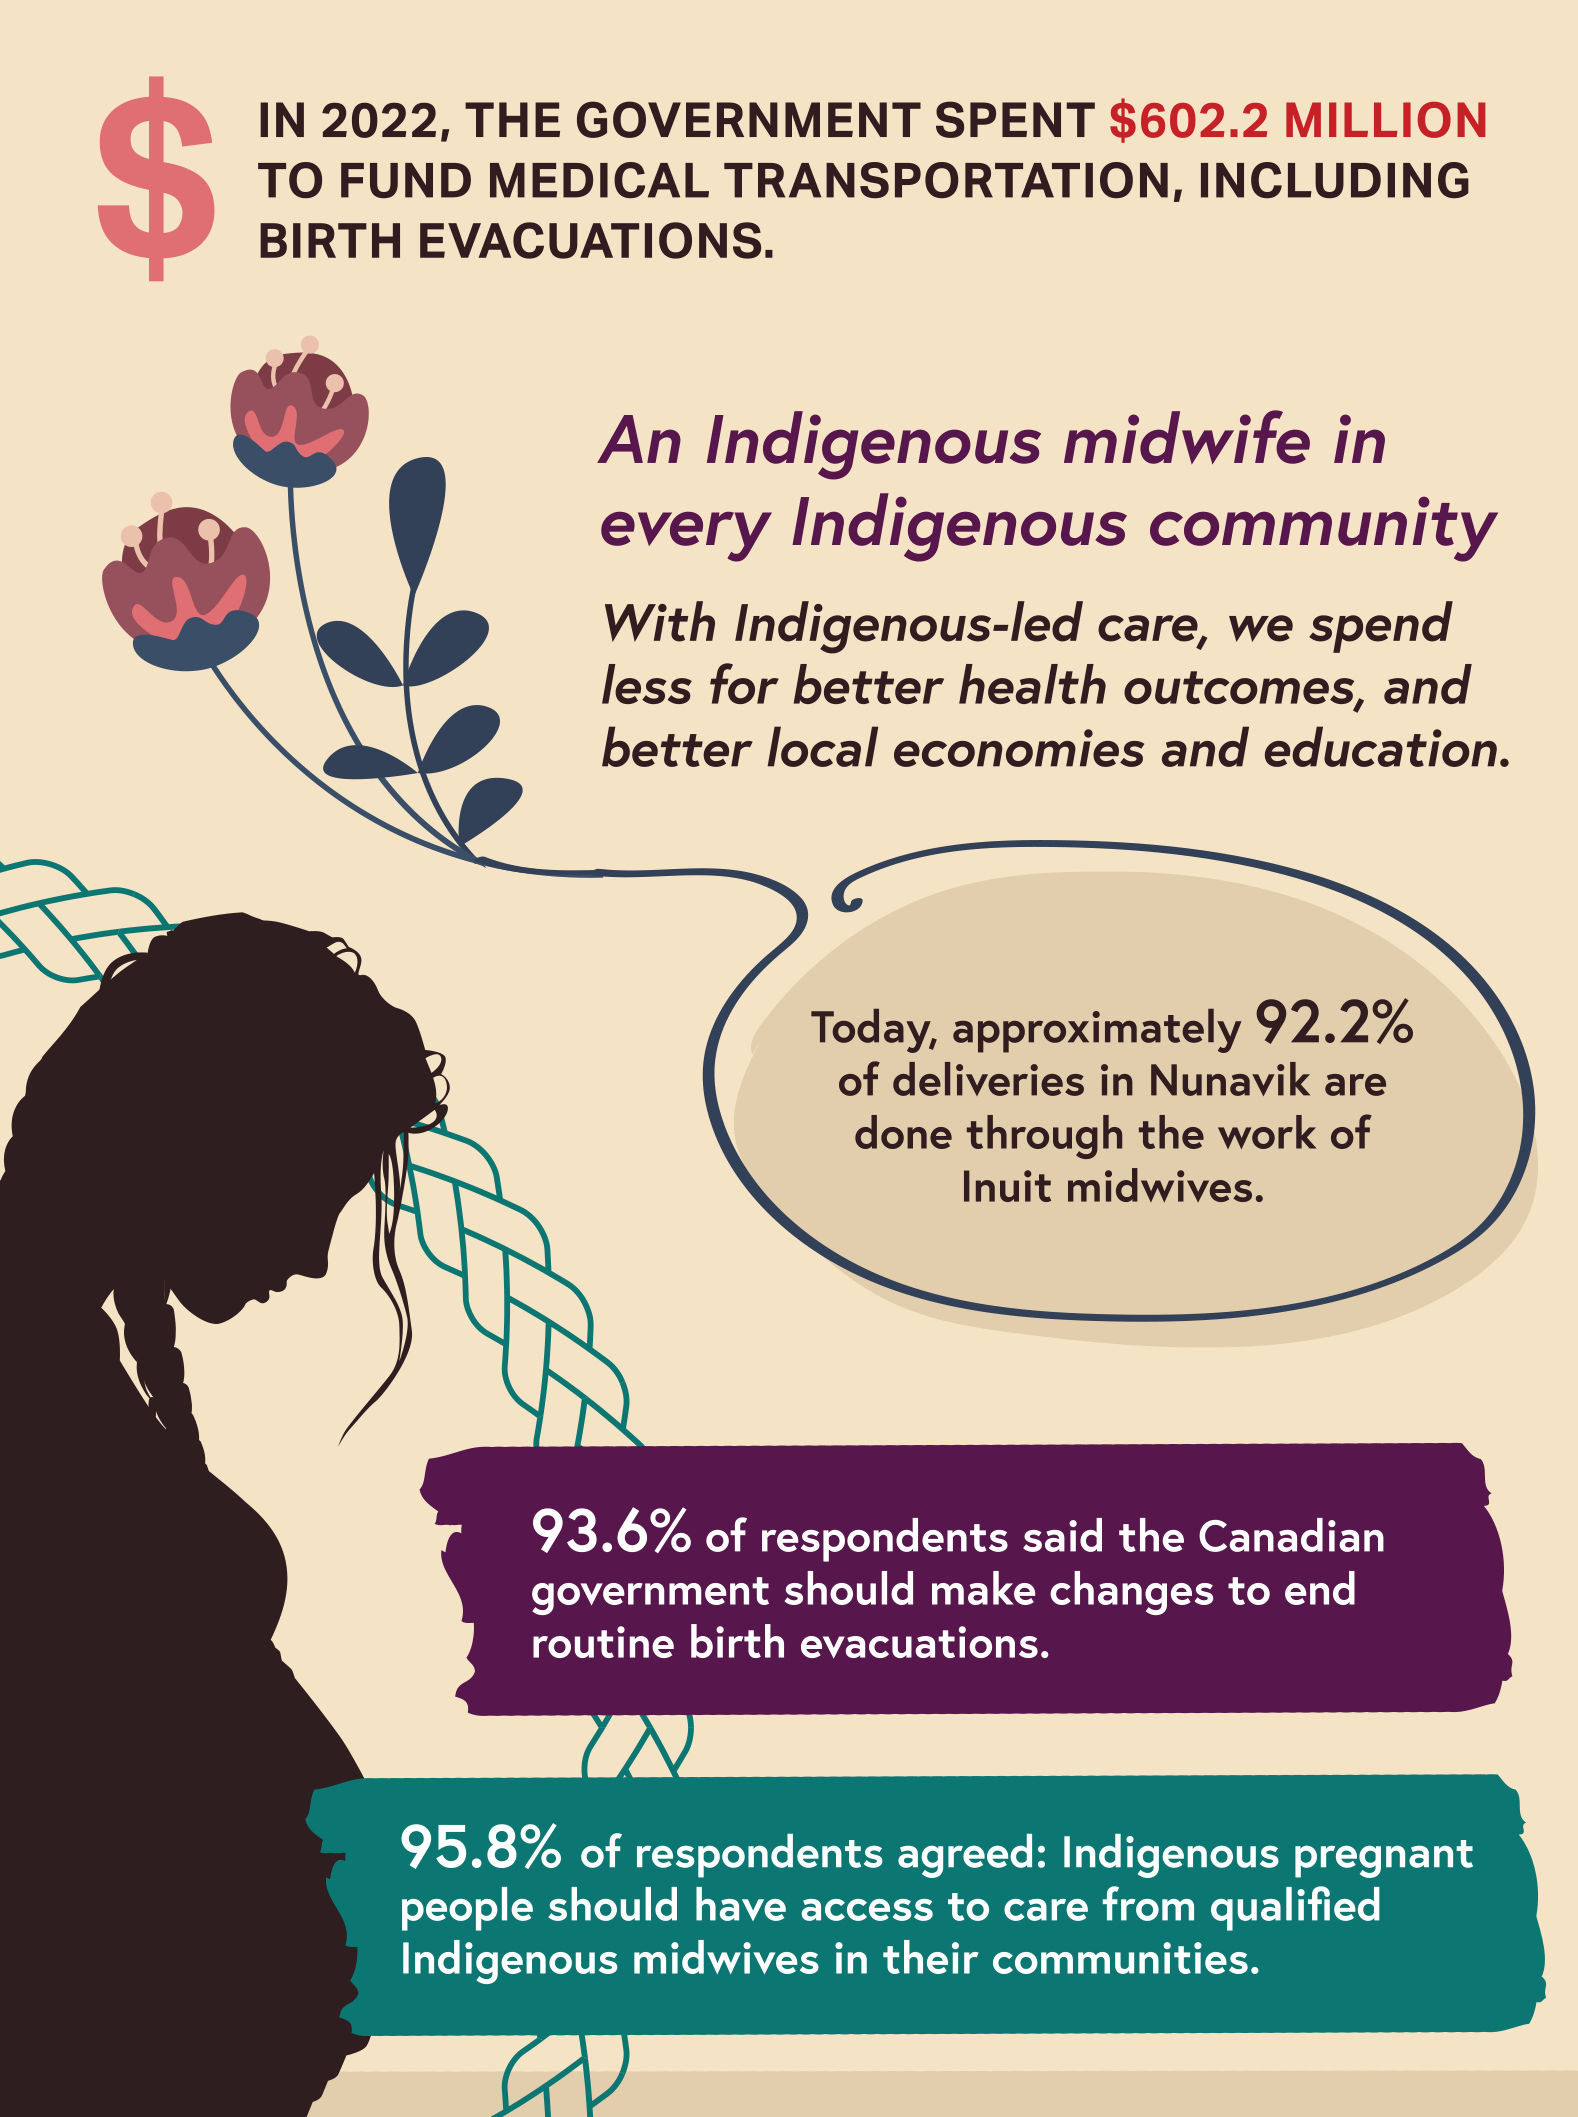 A beige background with purple, teal and red elements. A silhouette of a pregant Indigenous woman looking down. Text highlights statistics and results from the national poll: In 2022, the government spent $602.2 million to fund medical transportation, including birth evacuations. An Indigenous midwife in every Indigenous community. With Indigenous-led care, we spend less for better health outcomes, and better local economies and education. Today, approximately 92.2% of deliveries in Nunavik are done through the work of Inuit midwives. 93.6% of respondents said the Canadian government should make changes to end routine birth evacuations. 95% of respondents agreed: Indigenous pregnant people should have access to care from qualified Indigenous midwives in their communities.